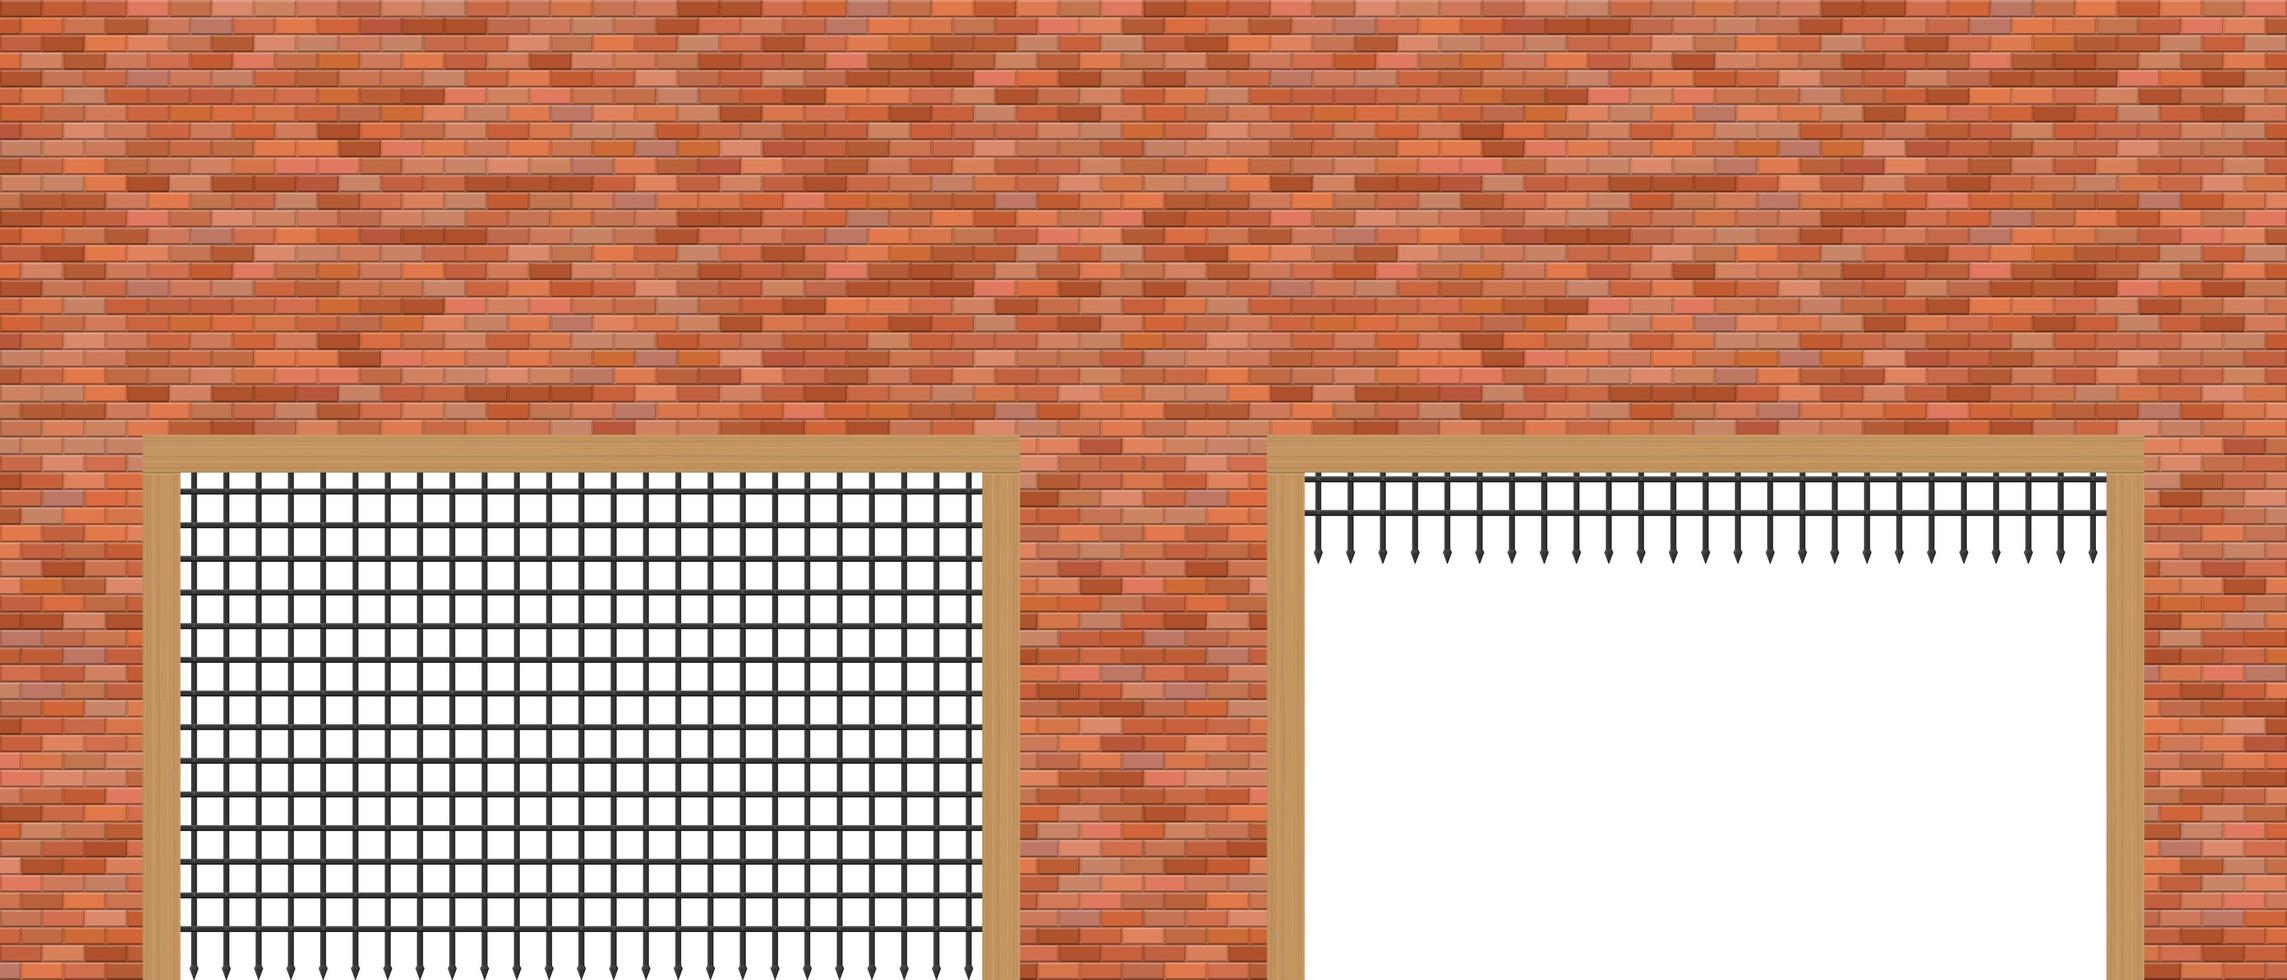 Medieval castle gate and brick wall  vector